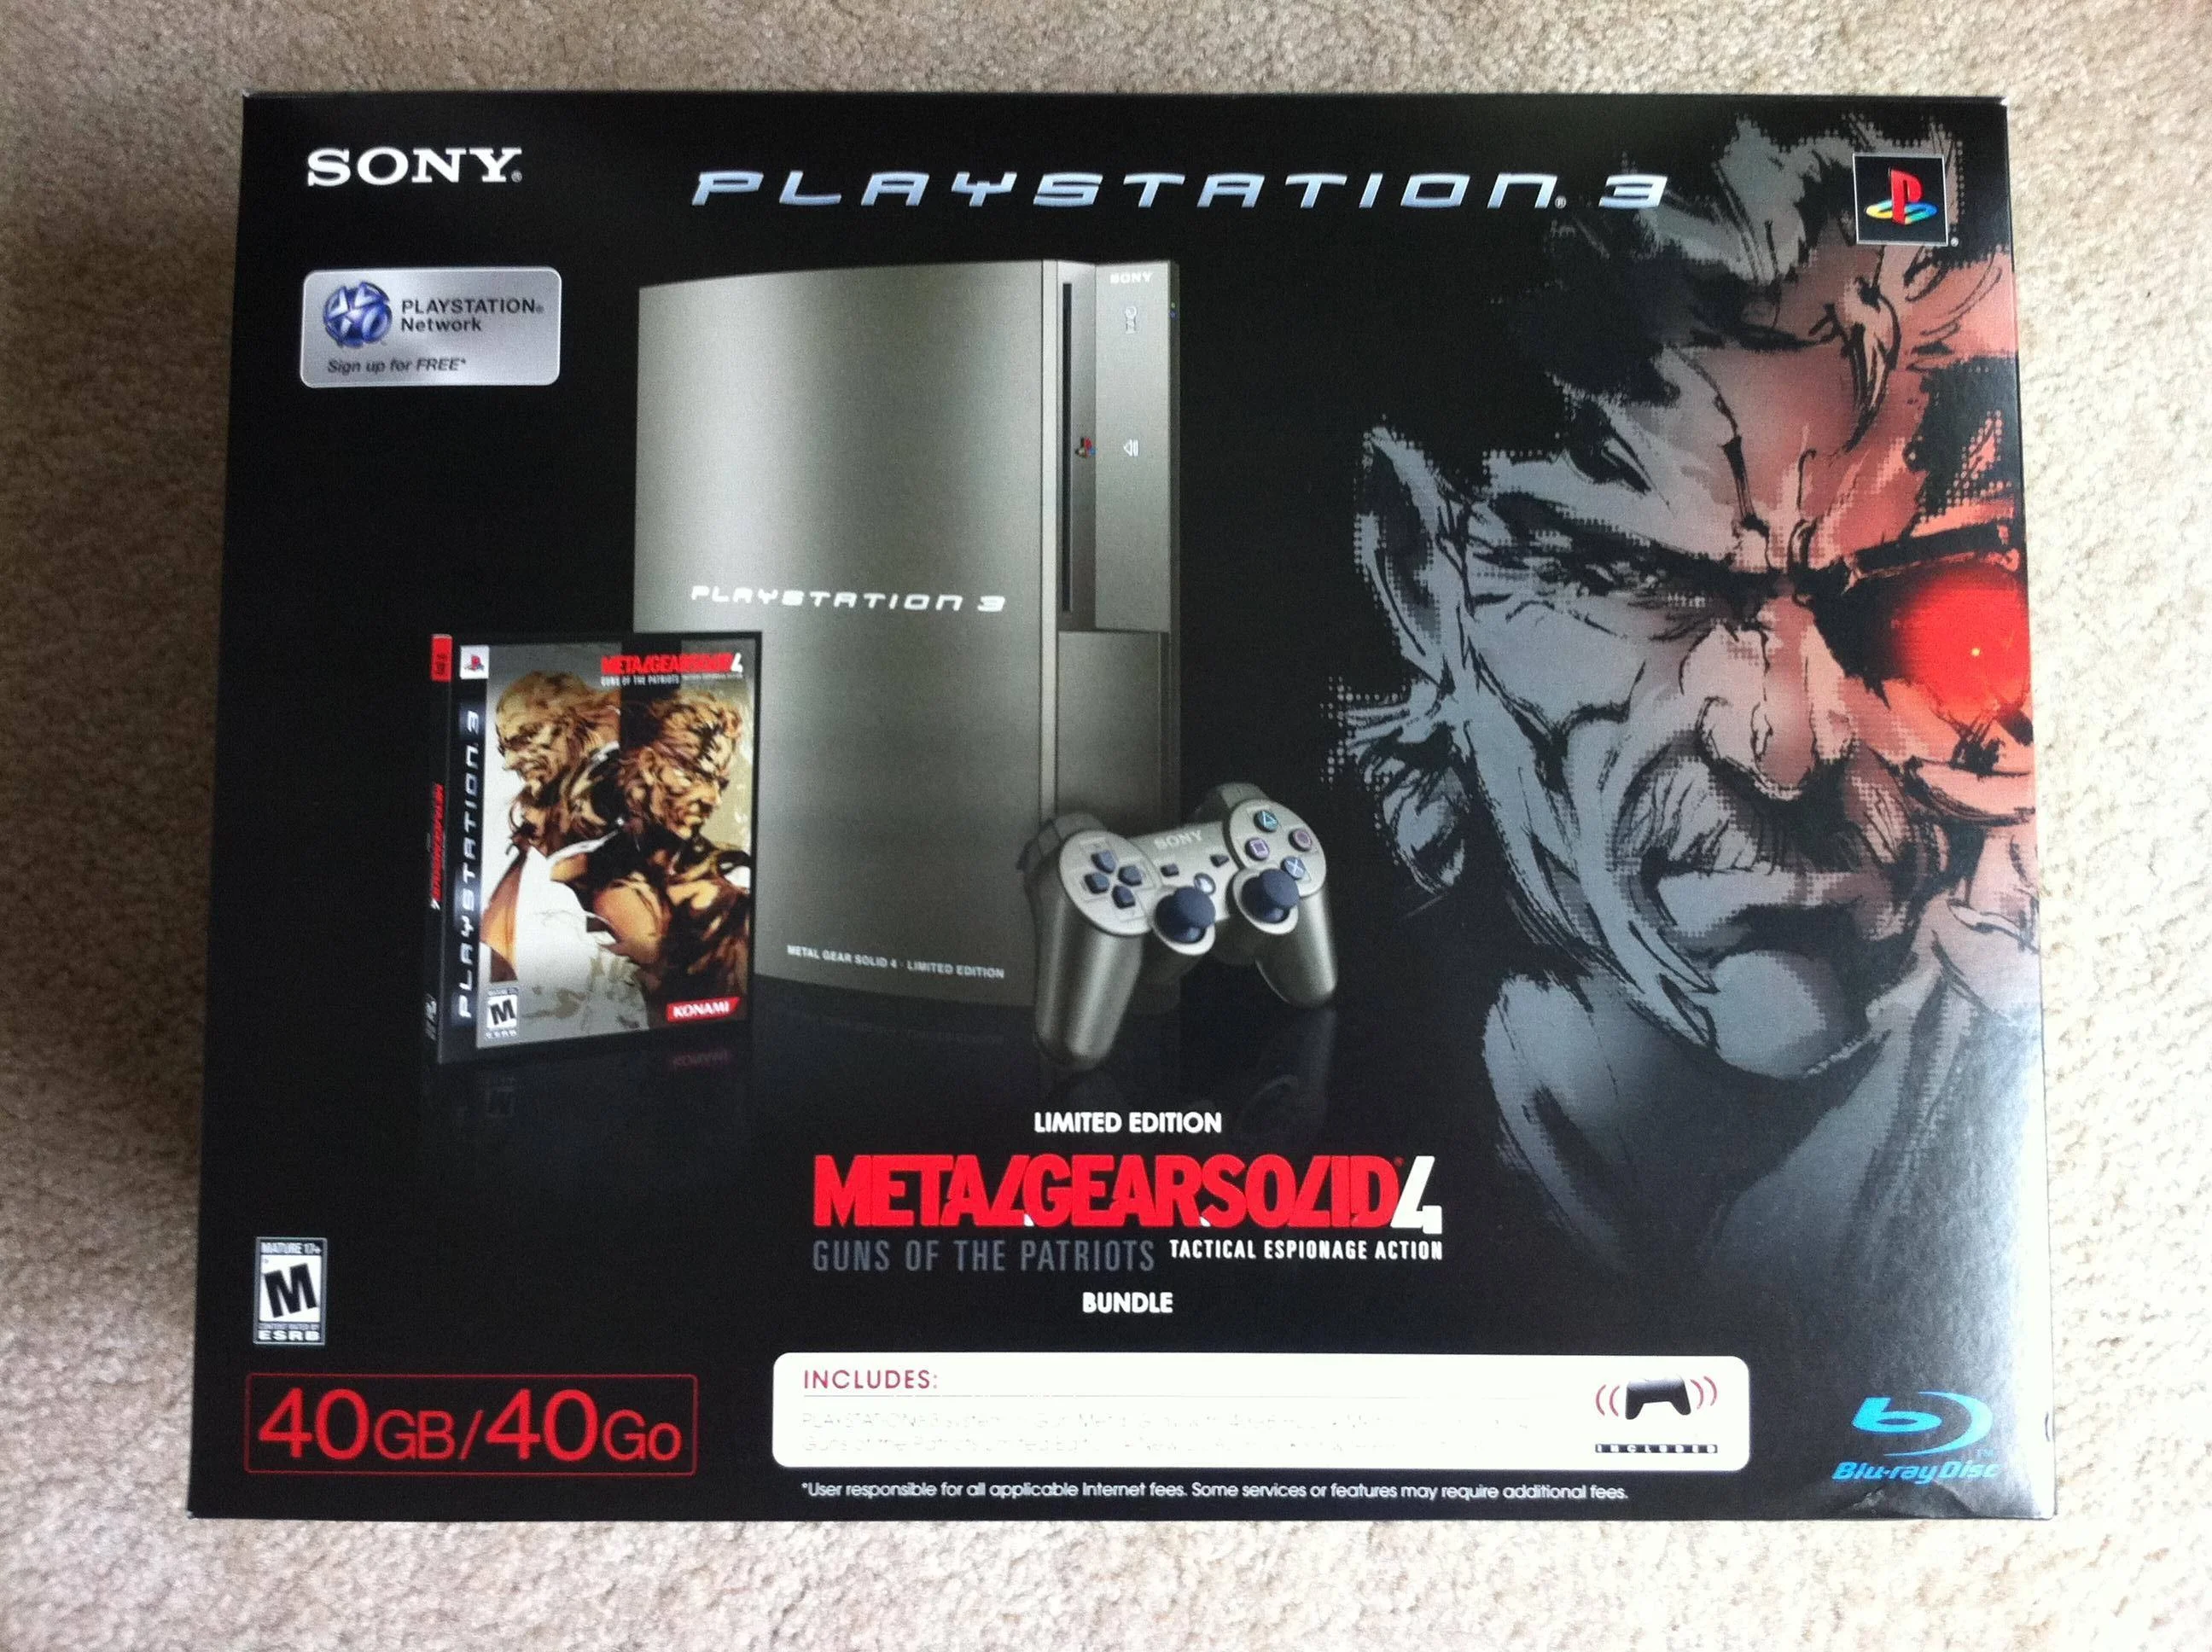 Ps3 final. Metal Gear Limited Edition ps3. Metal Gear Solid 4 ps3 Limited Edition. Ps3 Slim Limited Edition. Sony PLAYSTATION 3 Metal Gear Solid Limited Edition.